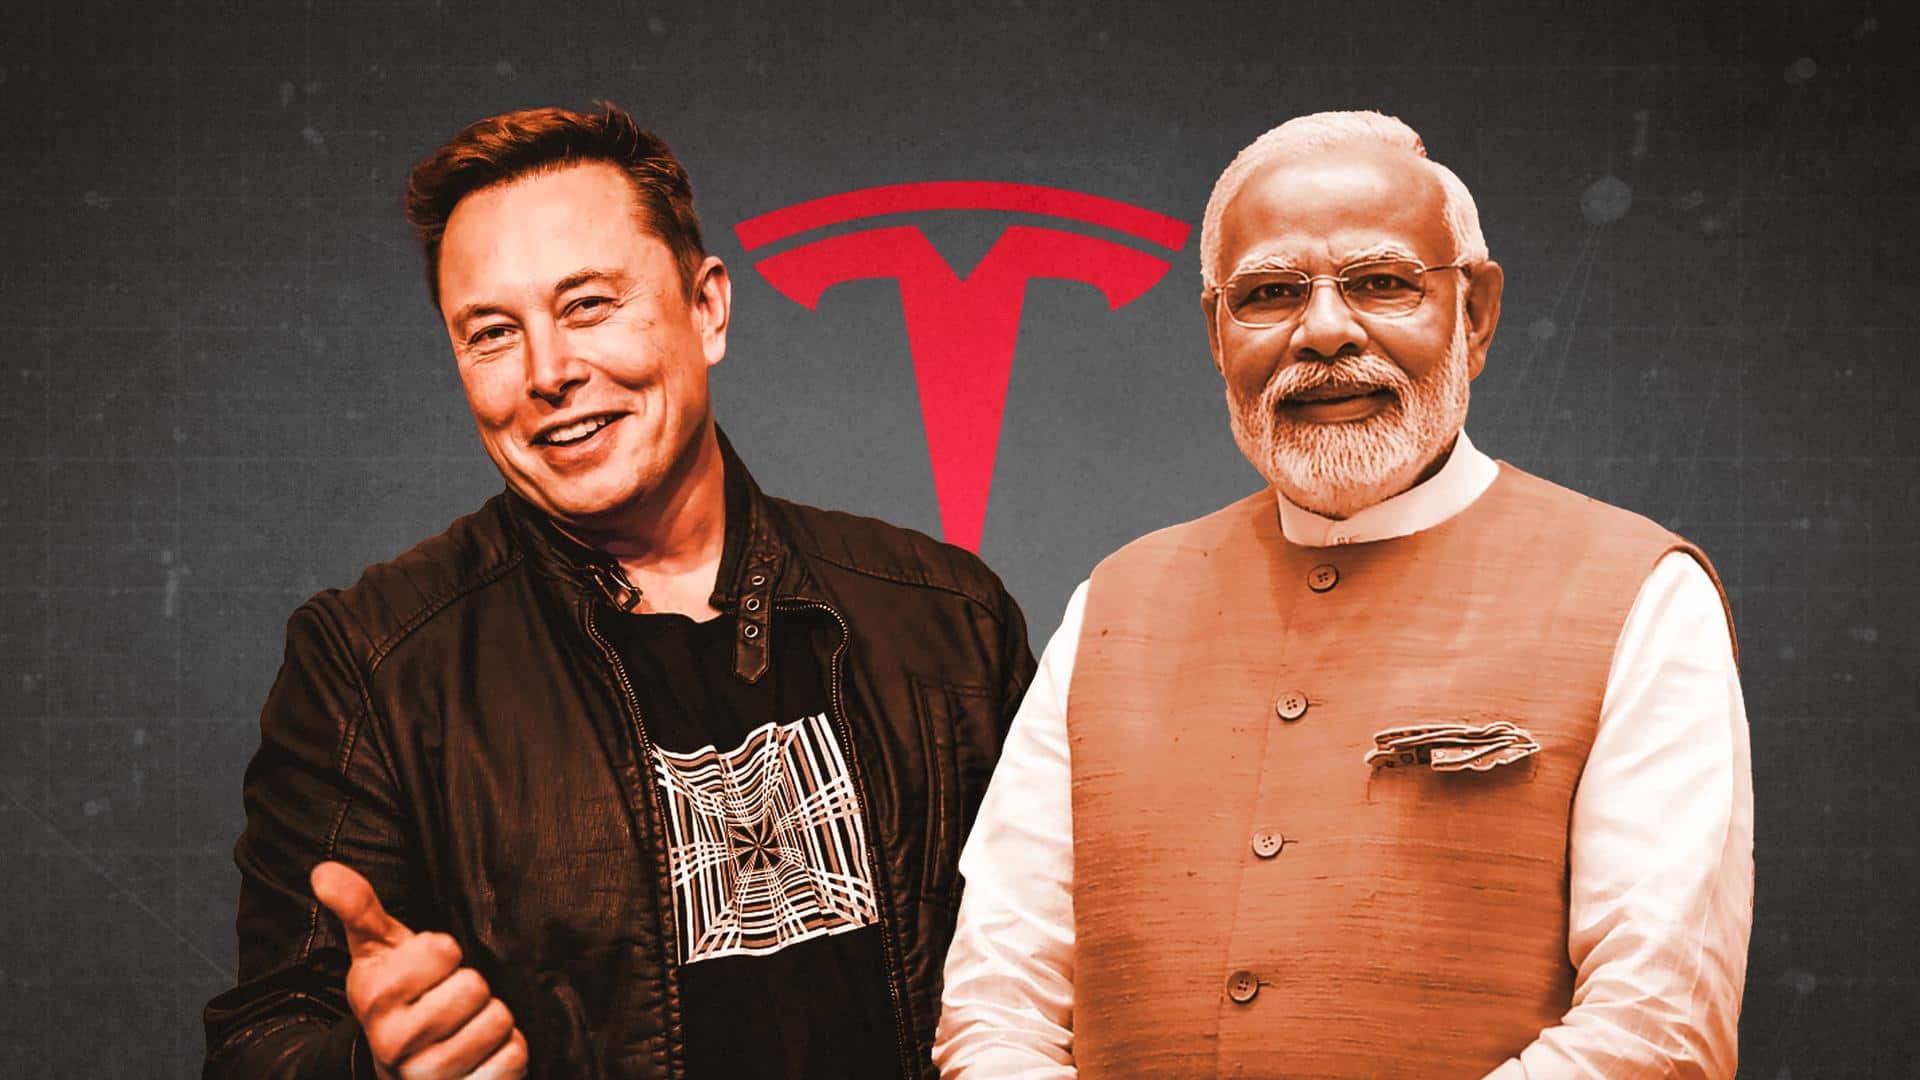 Tesla will soon come to India: Musk after meeting Modi